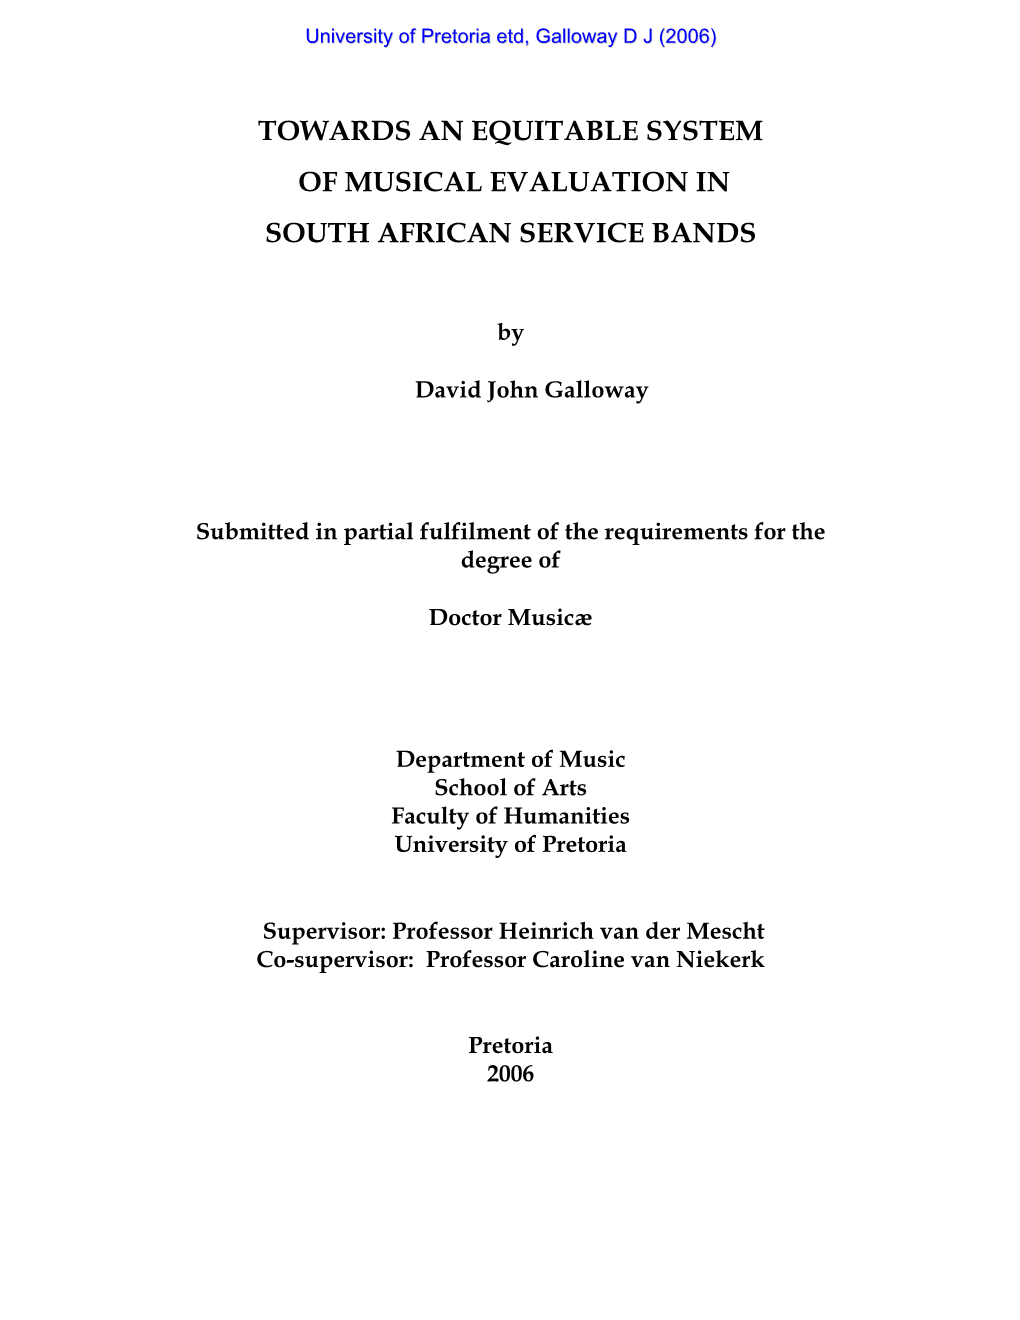 Towards an Equitable System of Musical Evaluation in South African